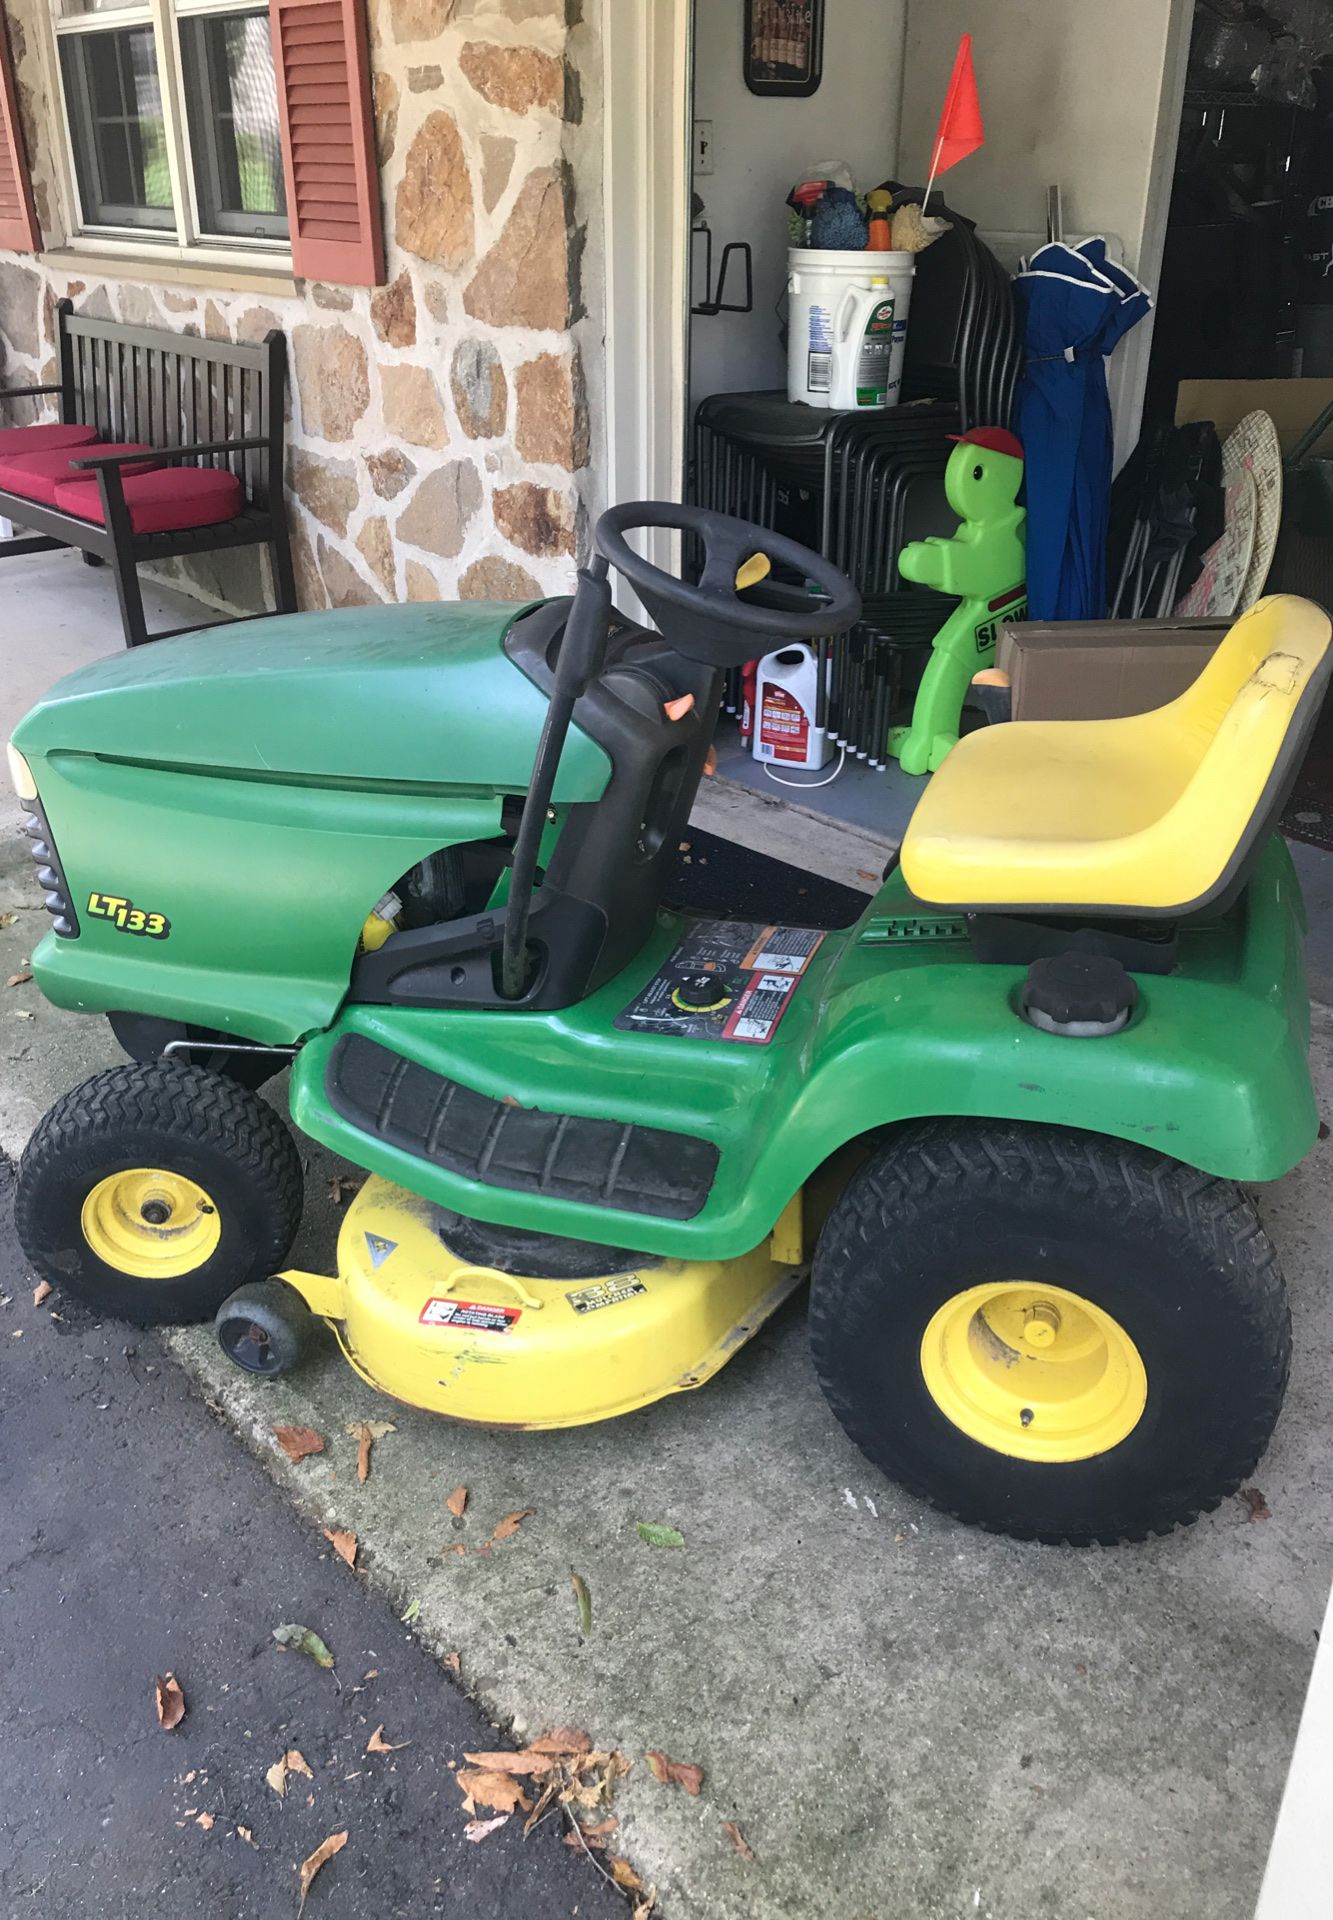 Lt133 John Deere lawn tractor on good shape for its age! Runs great just serviced! Ready to mow! Has factory mulching kit !